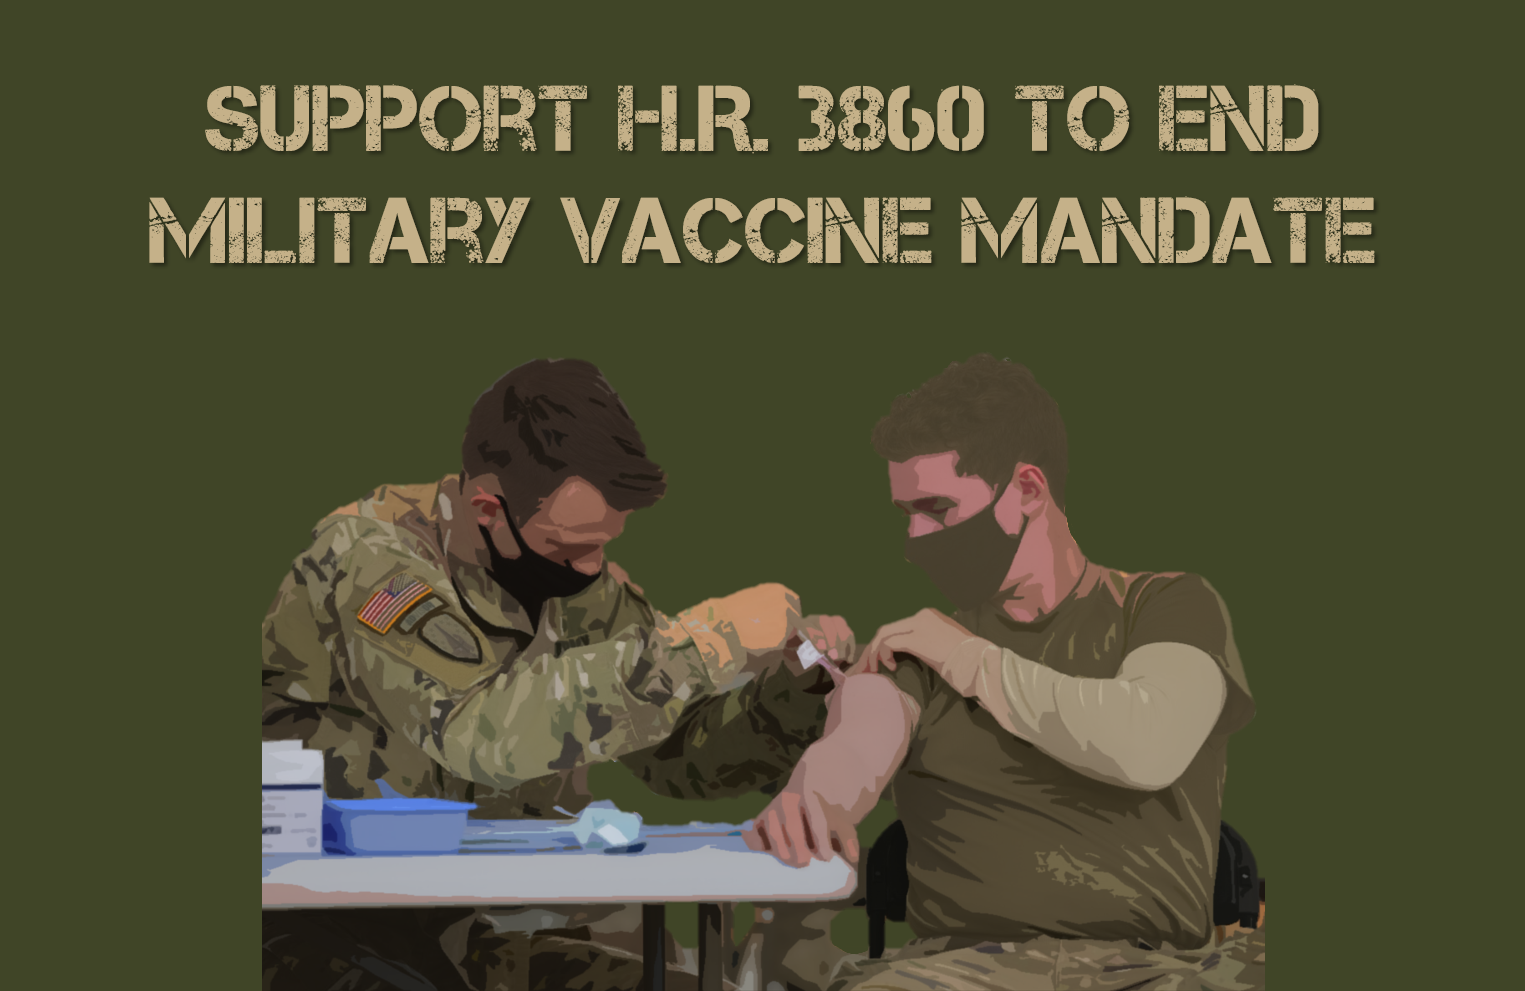 SUPPORT H.R. 3860 TO END TYRANNICAL MILITARY VACCINE MANDATE